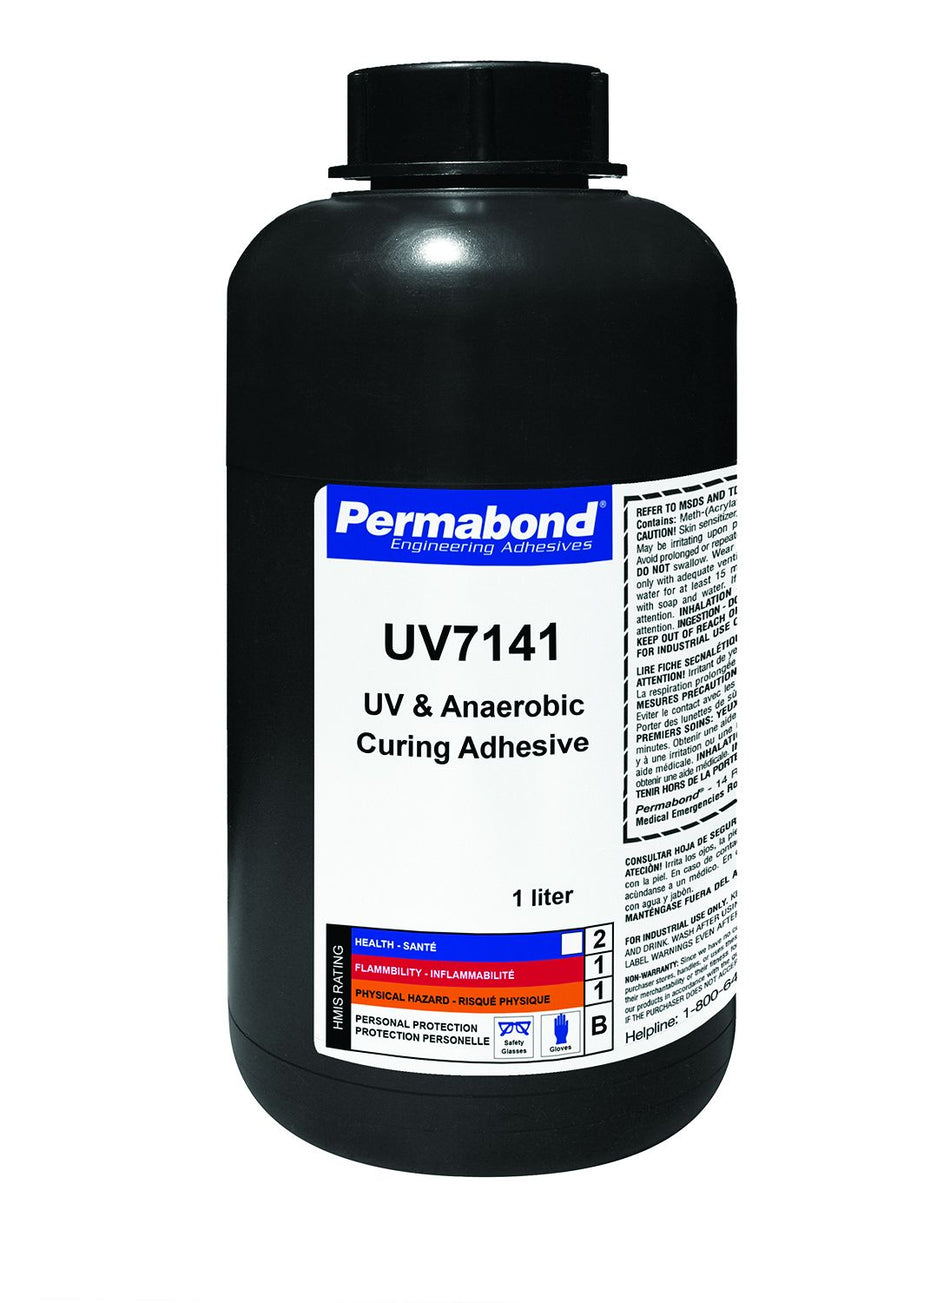 PERMABOND UV7141, UV-curable adhesive with a secondary anaerobic cure mechanism